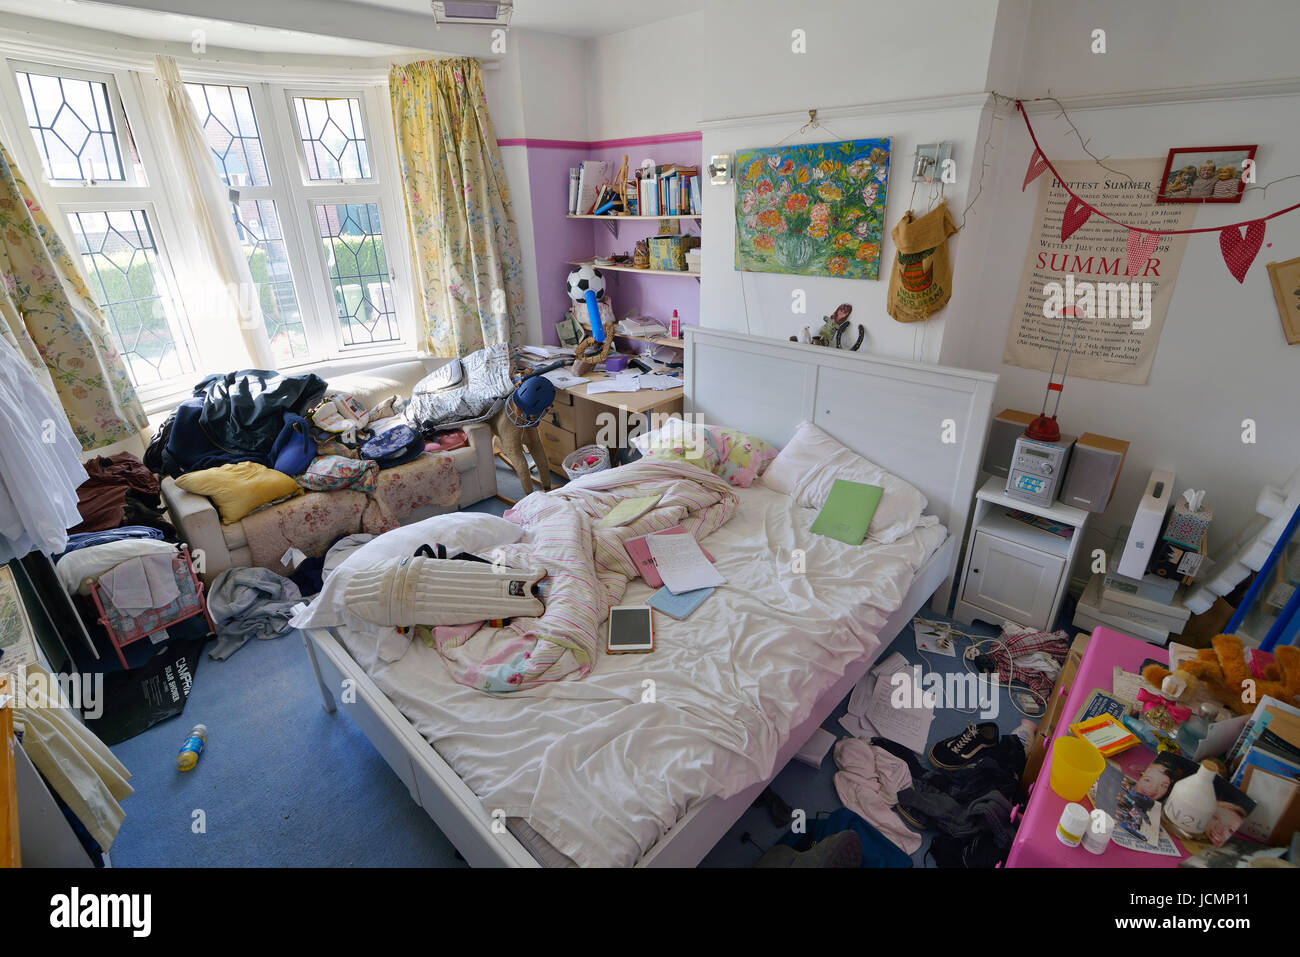 Messy Room High Resolution Stock Photography and Images - Alamy